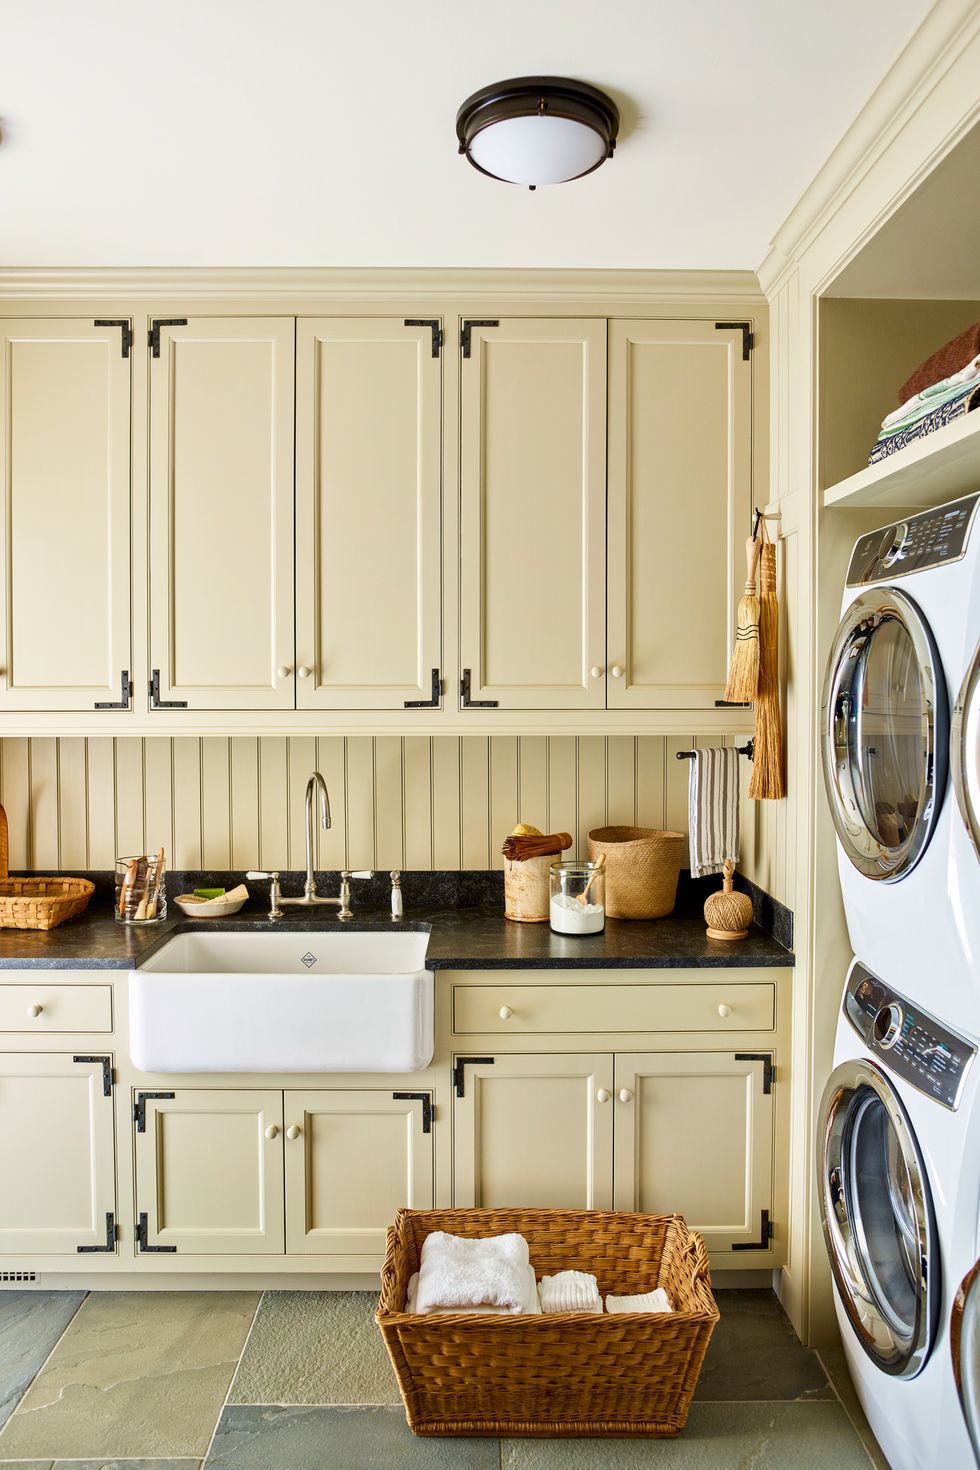 Laundry Room Shelves with Multi Colored Storage Baskets